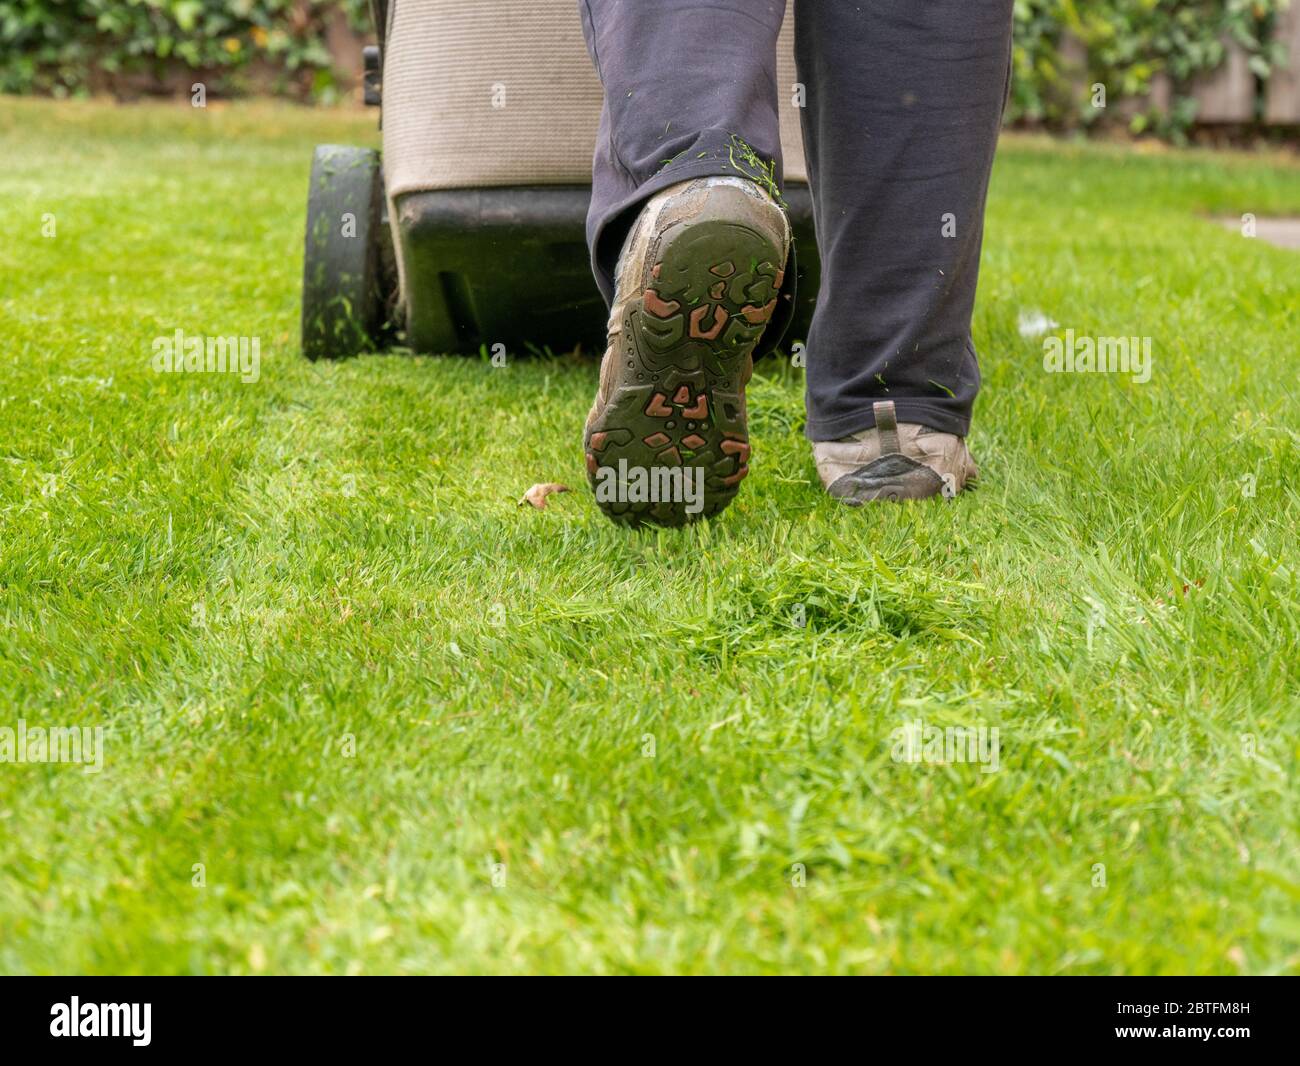 Mowing the lawn. Woman walking behind a lawn mower Stock Photo